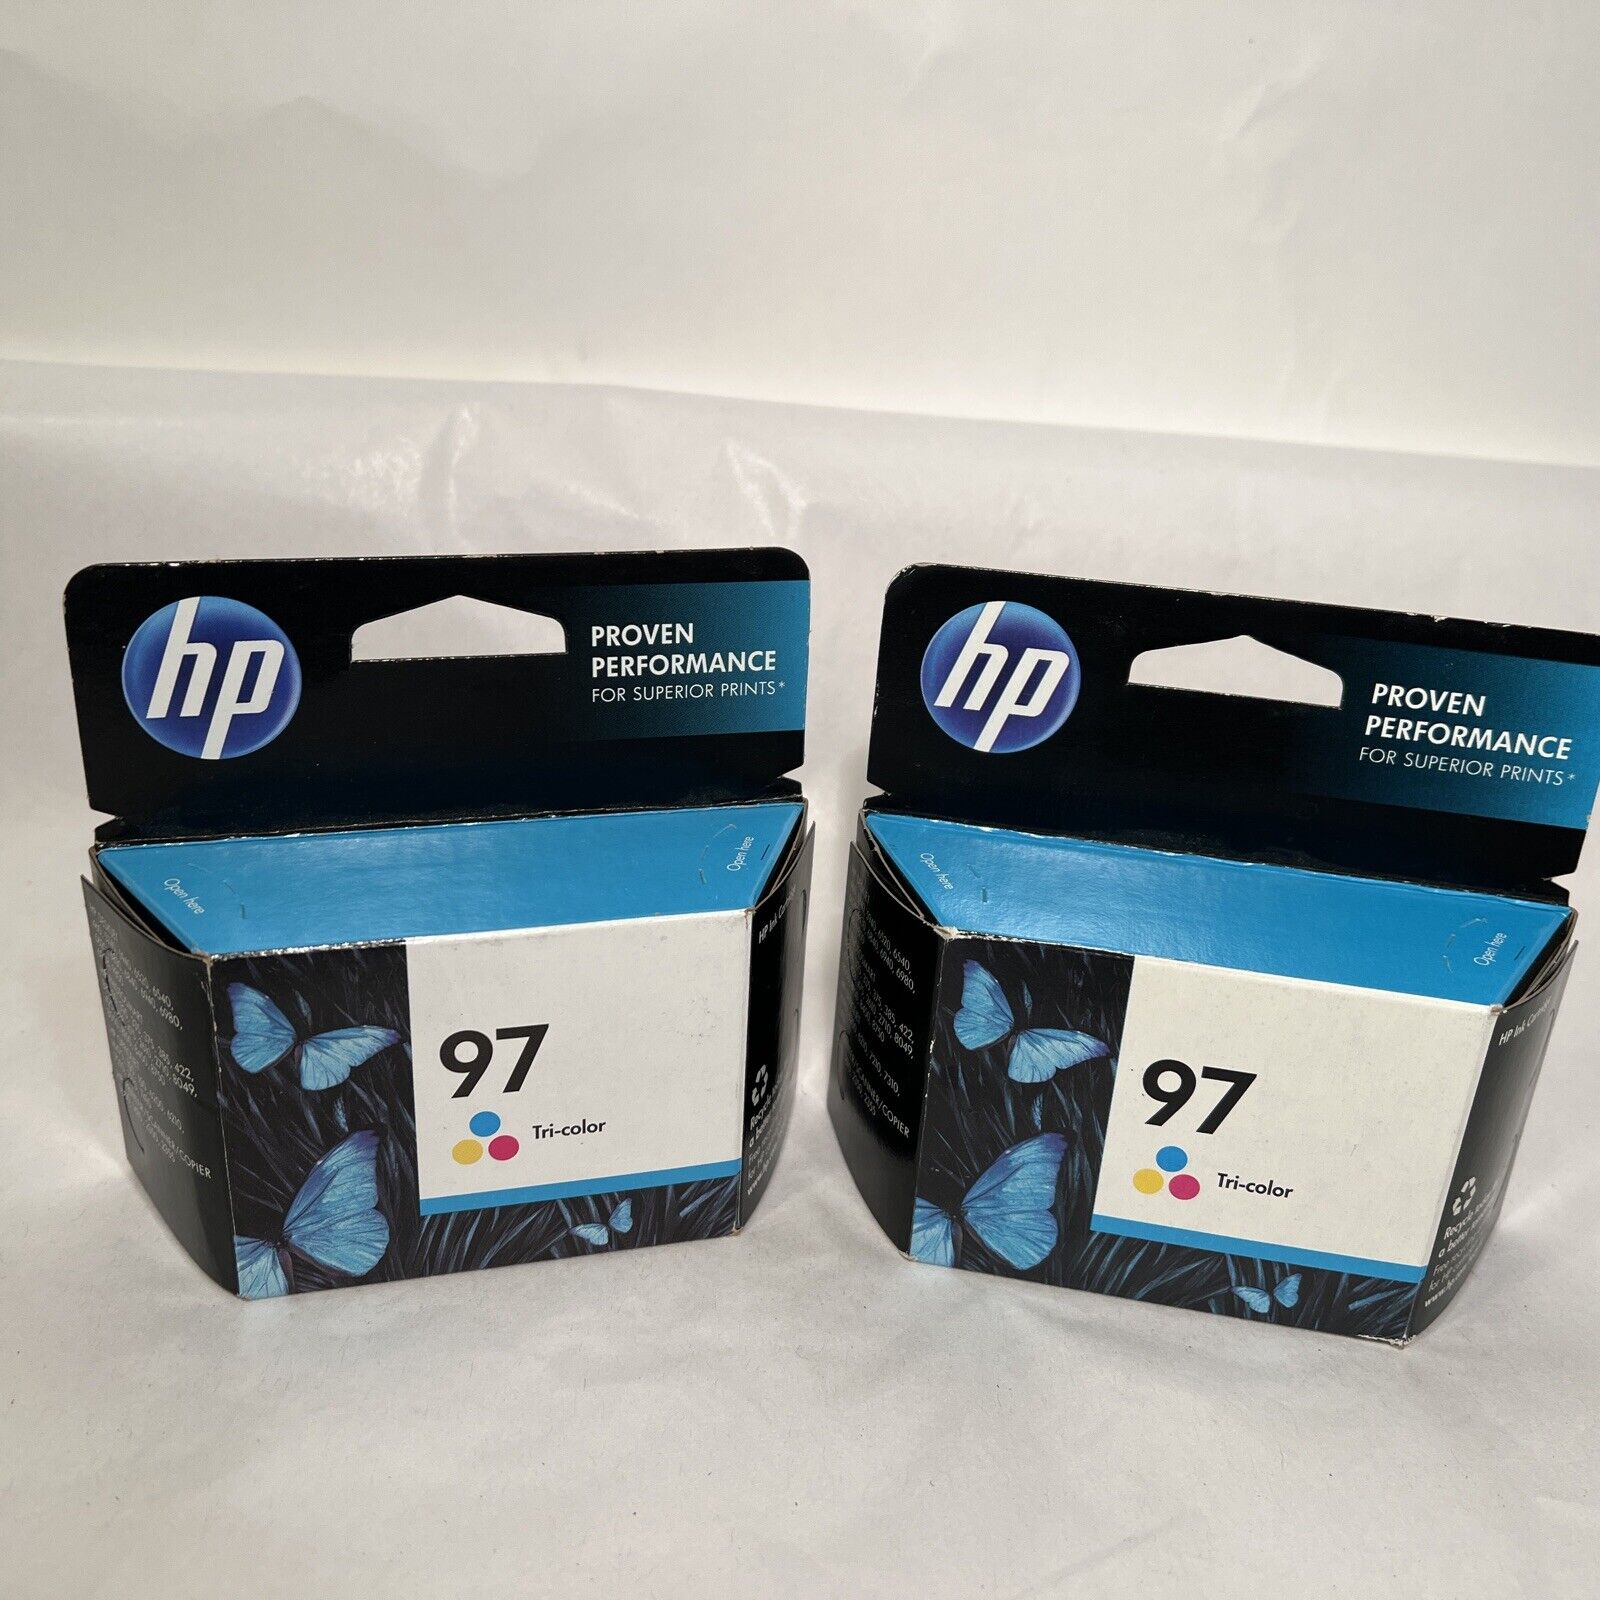 Lot 2 Genuine HP  97 Tri-Color C9363WN Ink Cartridges Sealed Boxes New Unopened